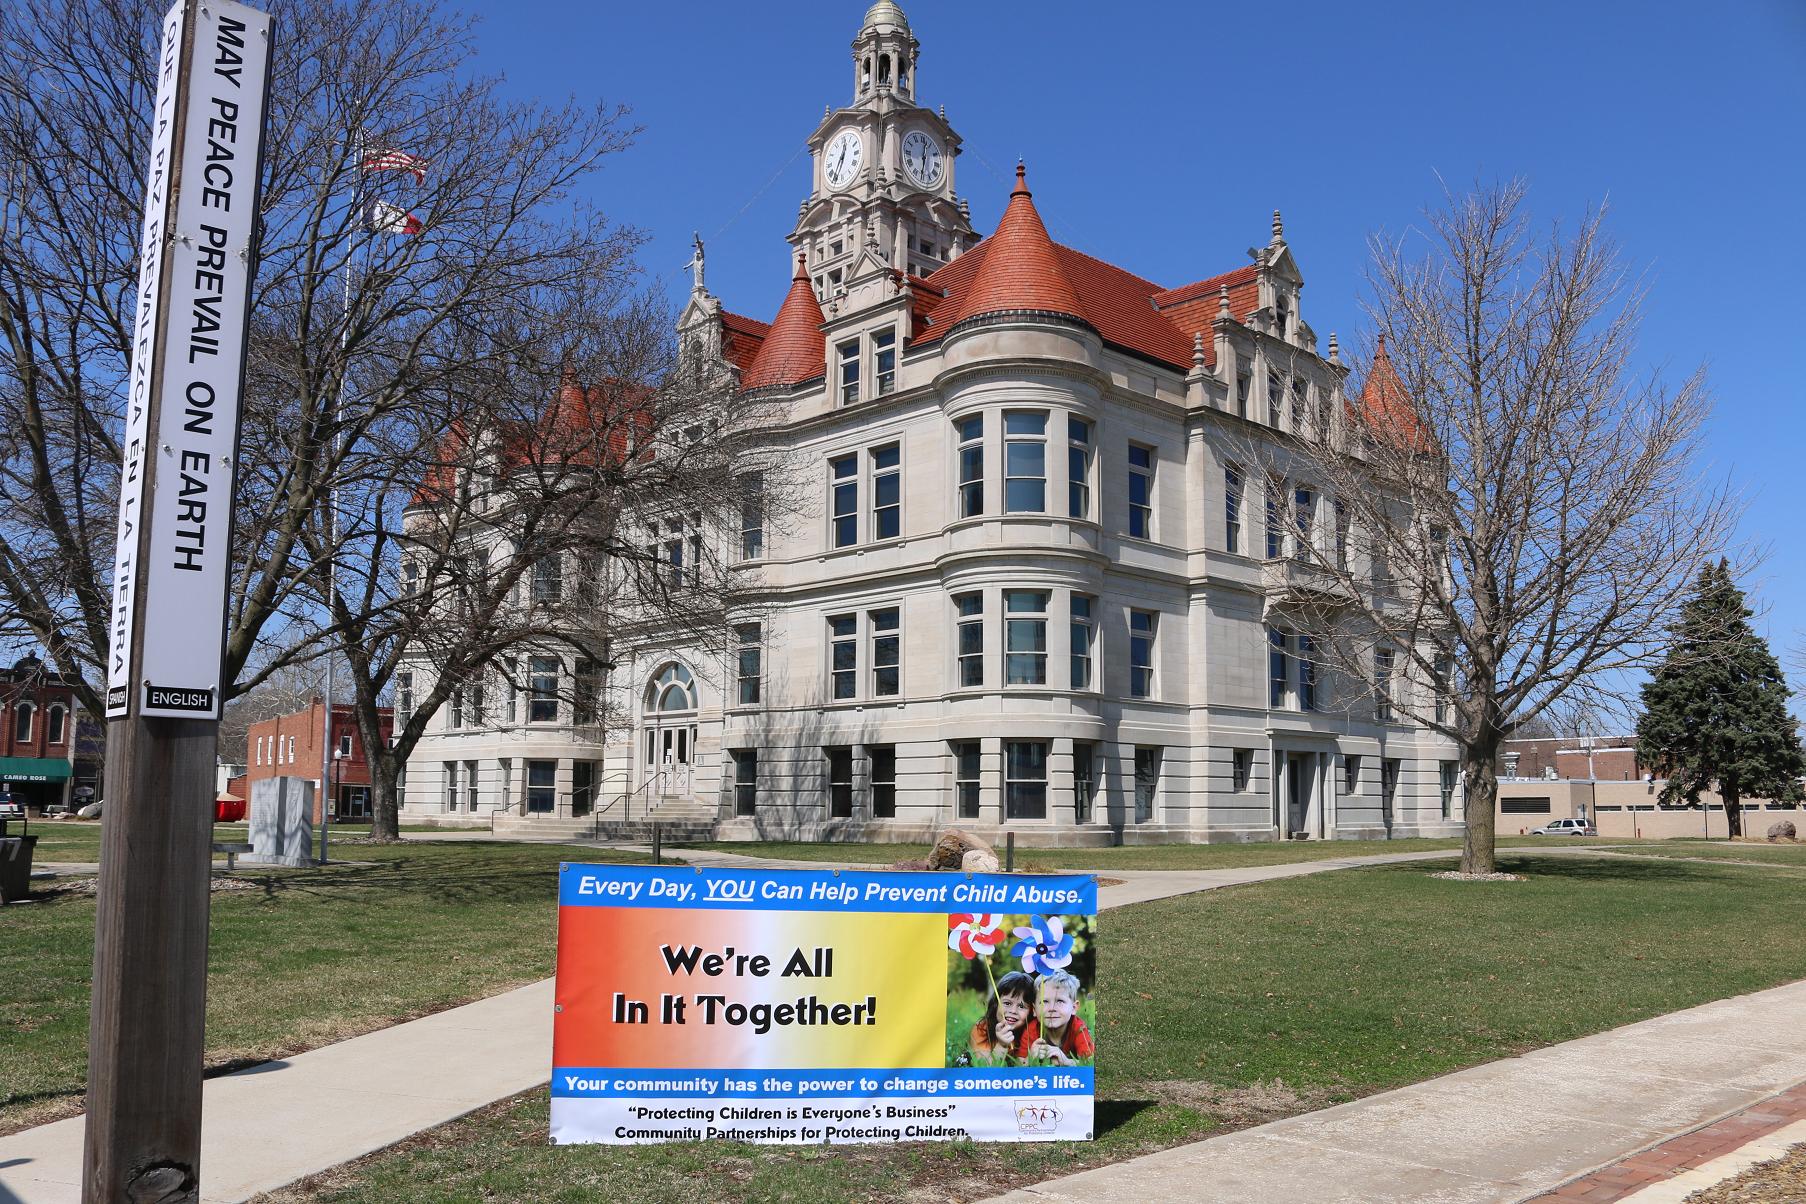 The Dallas County Children’s Advocacy Council is marking April as National Child Abuse Awareness Month with a banner at the southeast corned of the Dallas County Courthouse lawn and other activities.